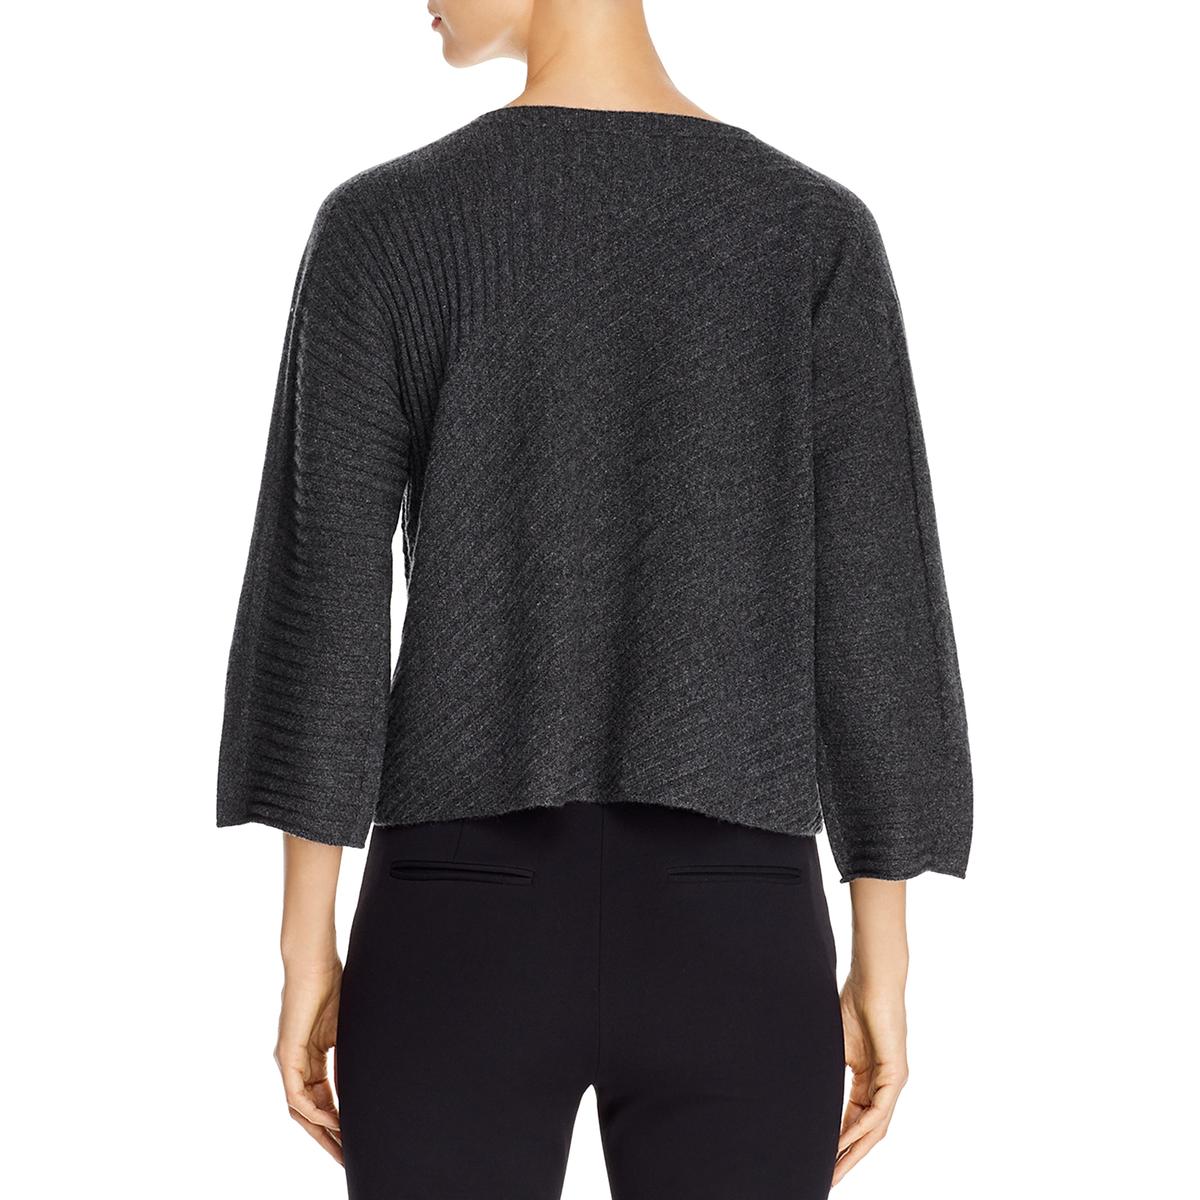 Eileen Fisher Womens Cashmere Boatneck Ribbed Top Shirt BHFO 2539